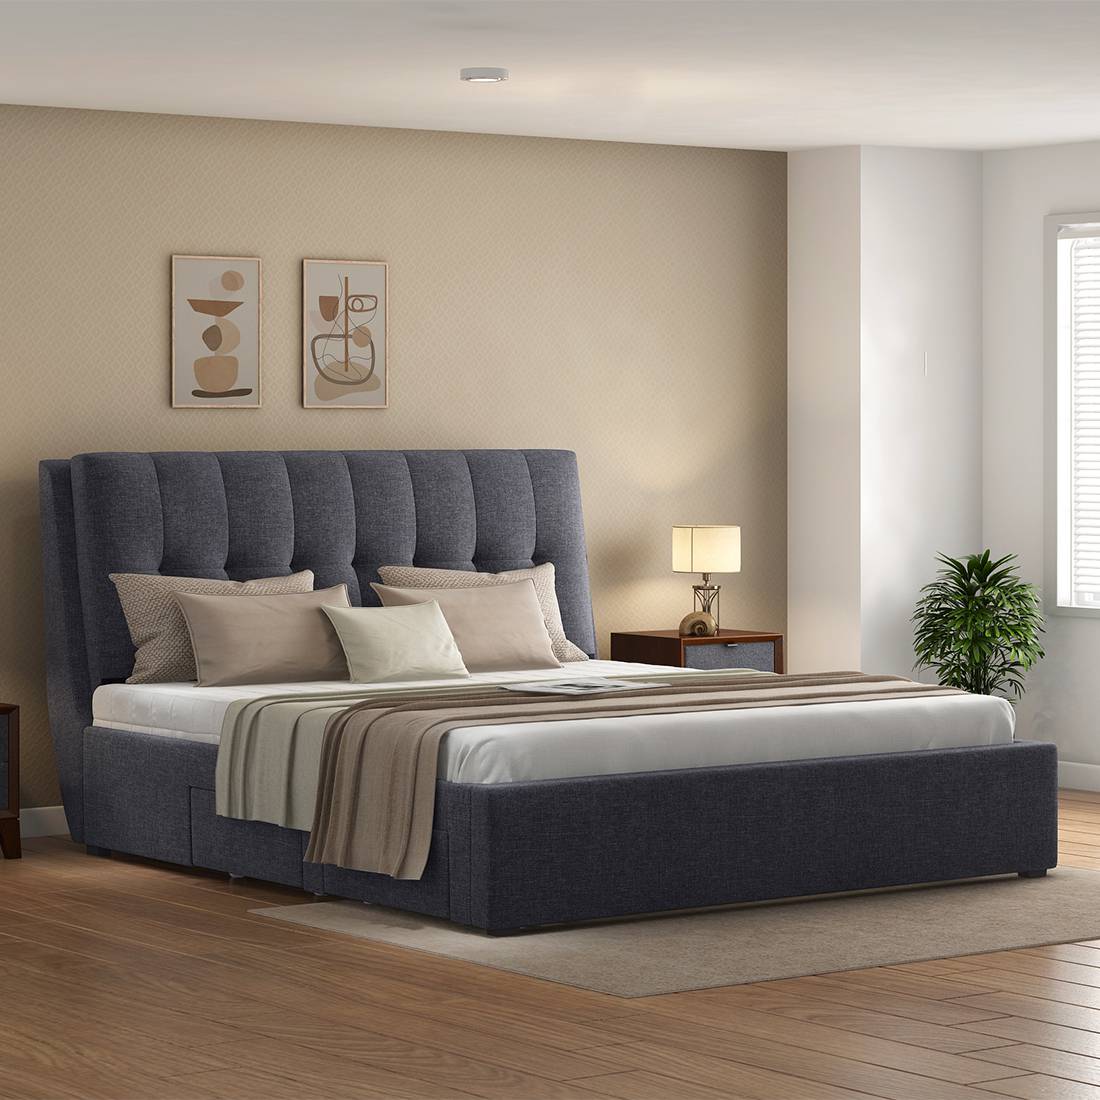 Double Bed Buy Double Beds Online In India 2021 Designs Urban Ladder